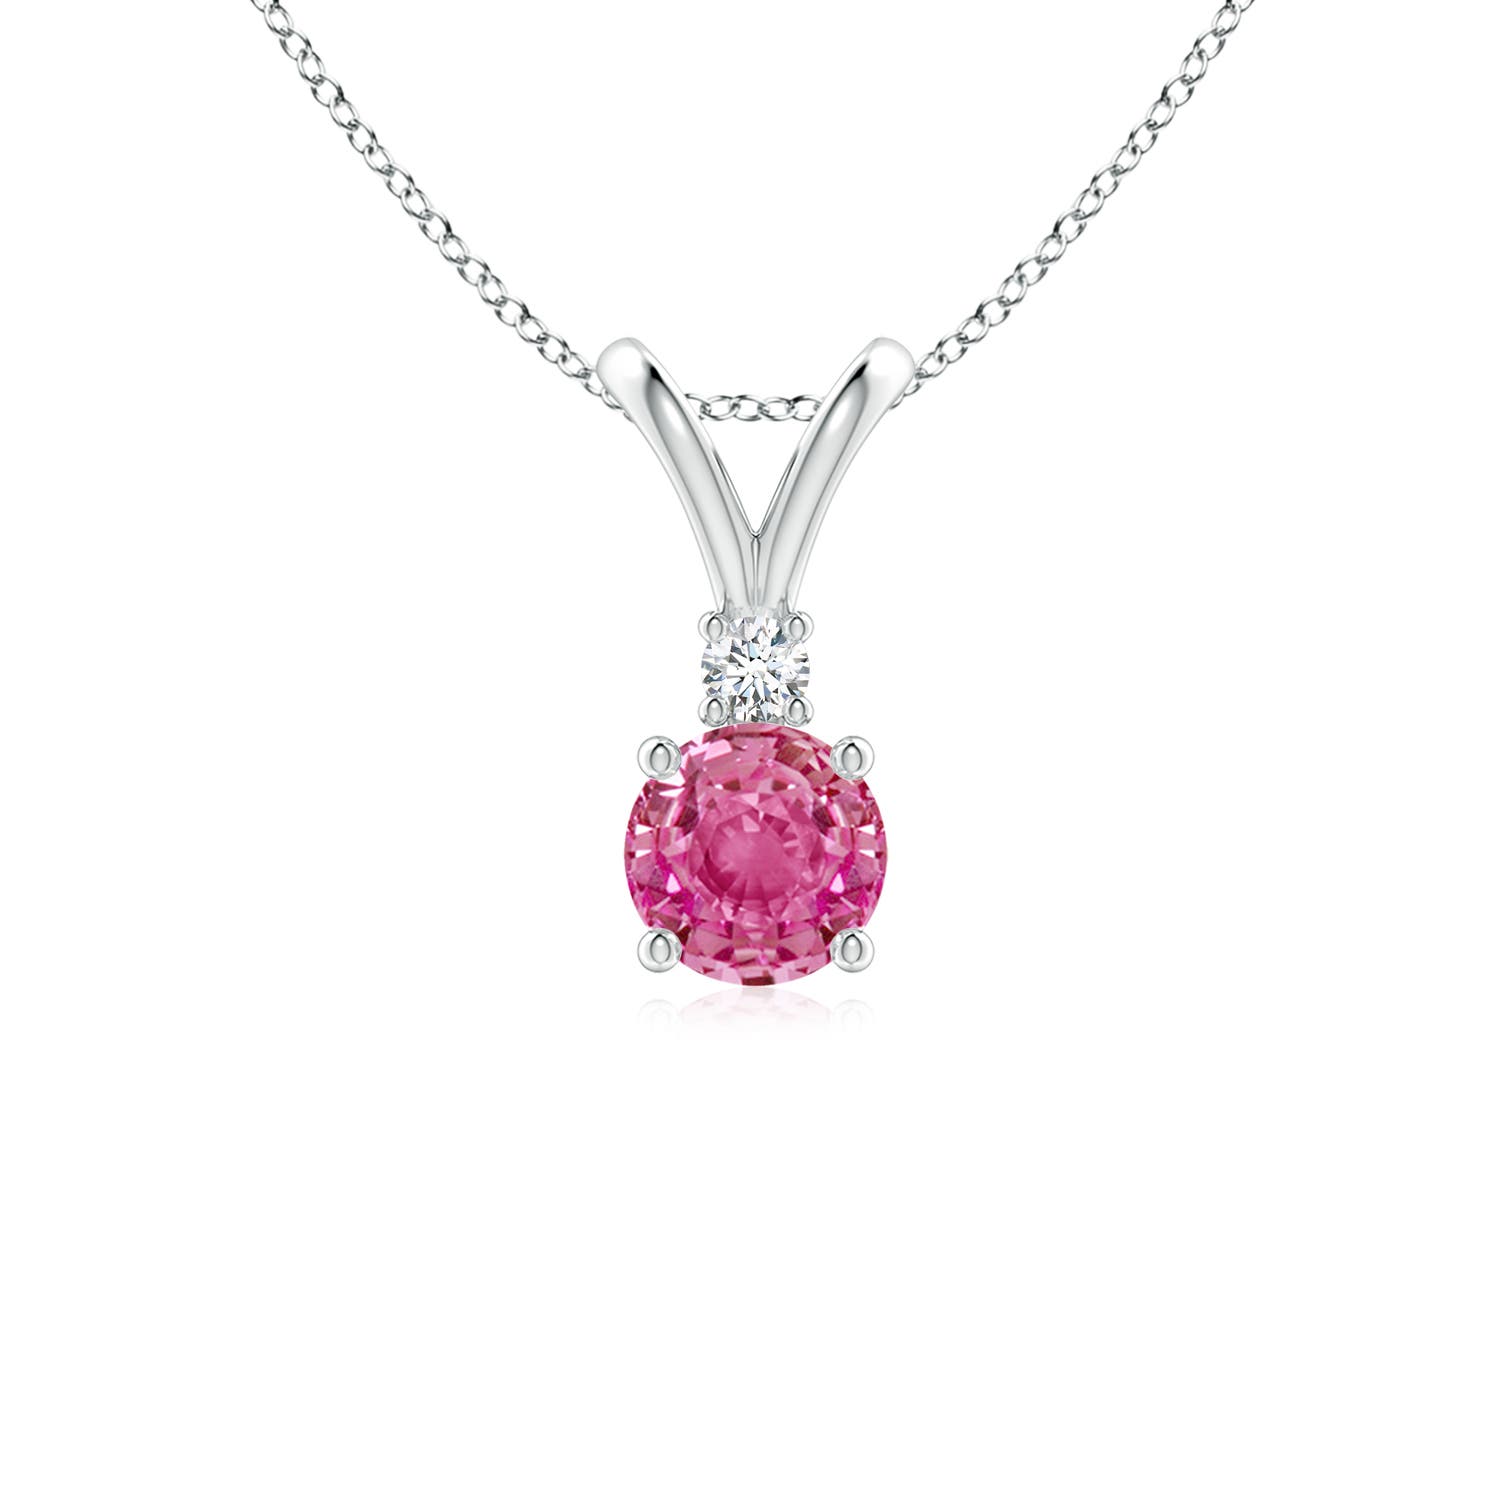 AAA - Pink Sapphire / 0.63 CT / 14 KT White Gold